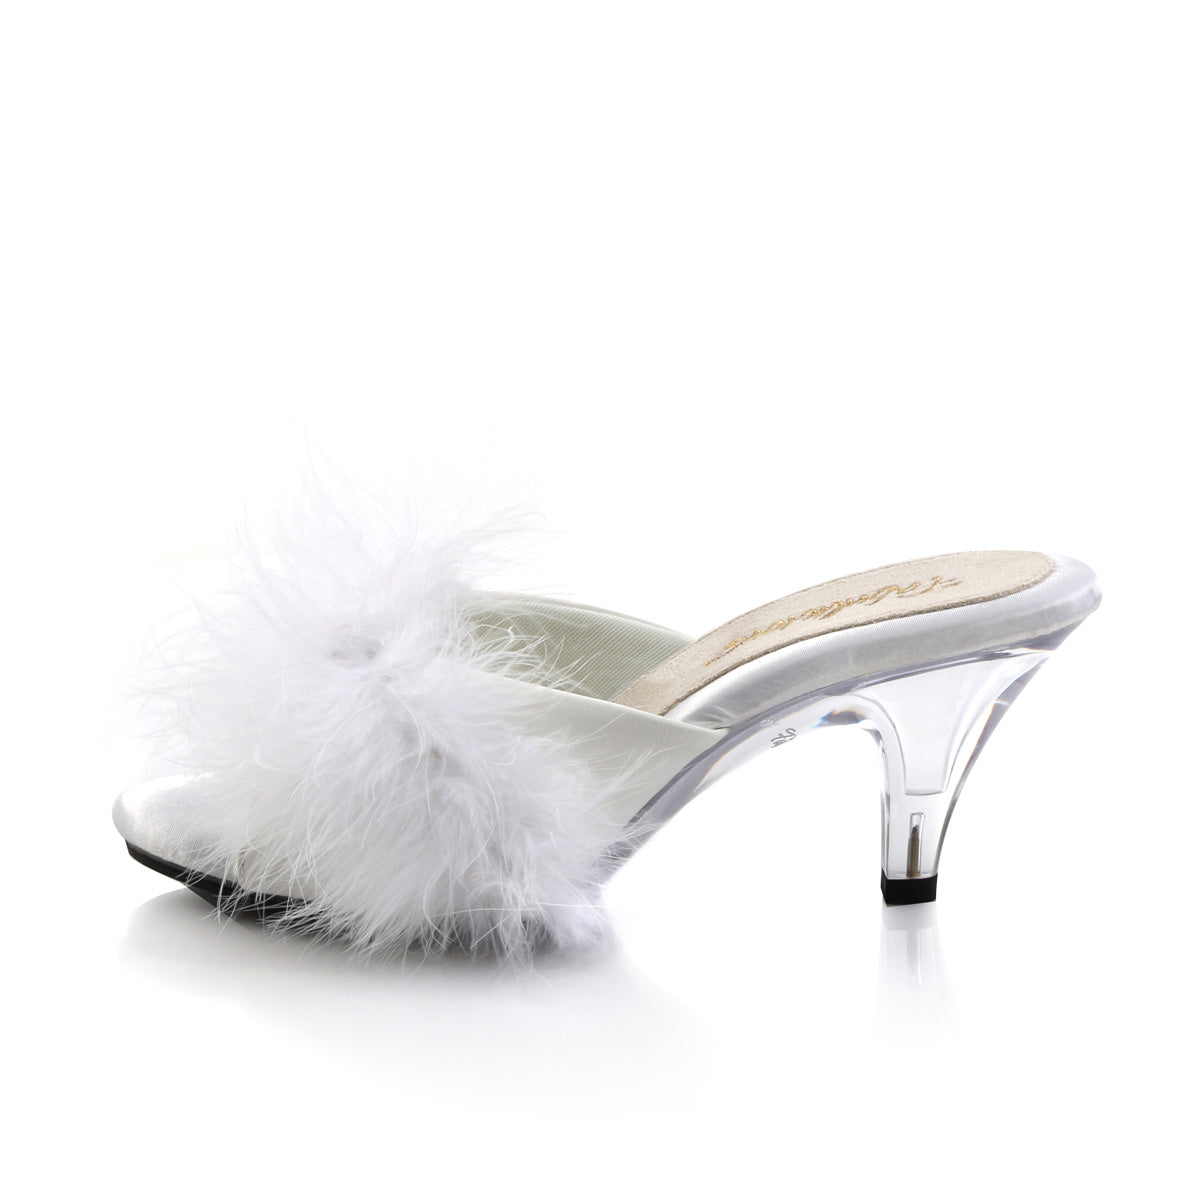 BELLE-301F Fabulicious 3 Inch Heel White Faux Fur Sexy Shoes-Fabulicious- Sexy Shoes Pole Dance Heels